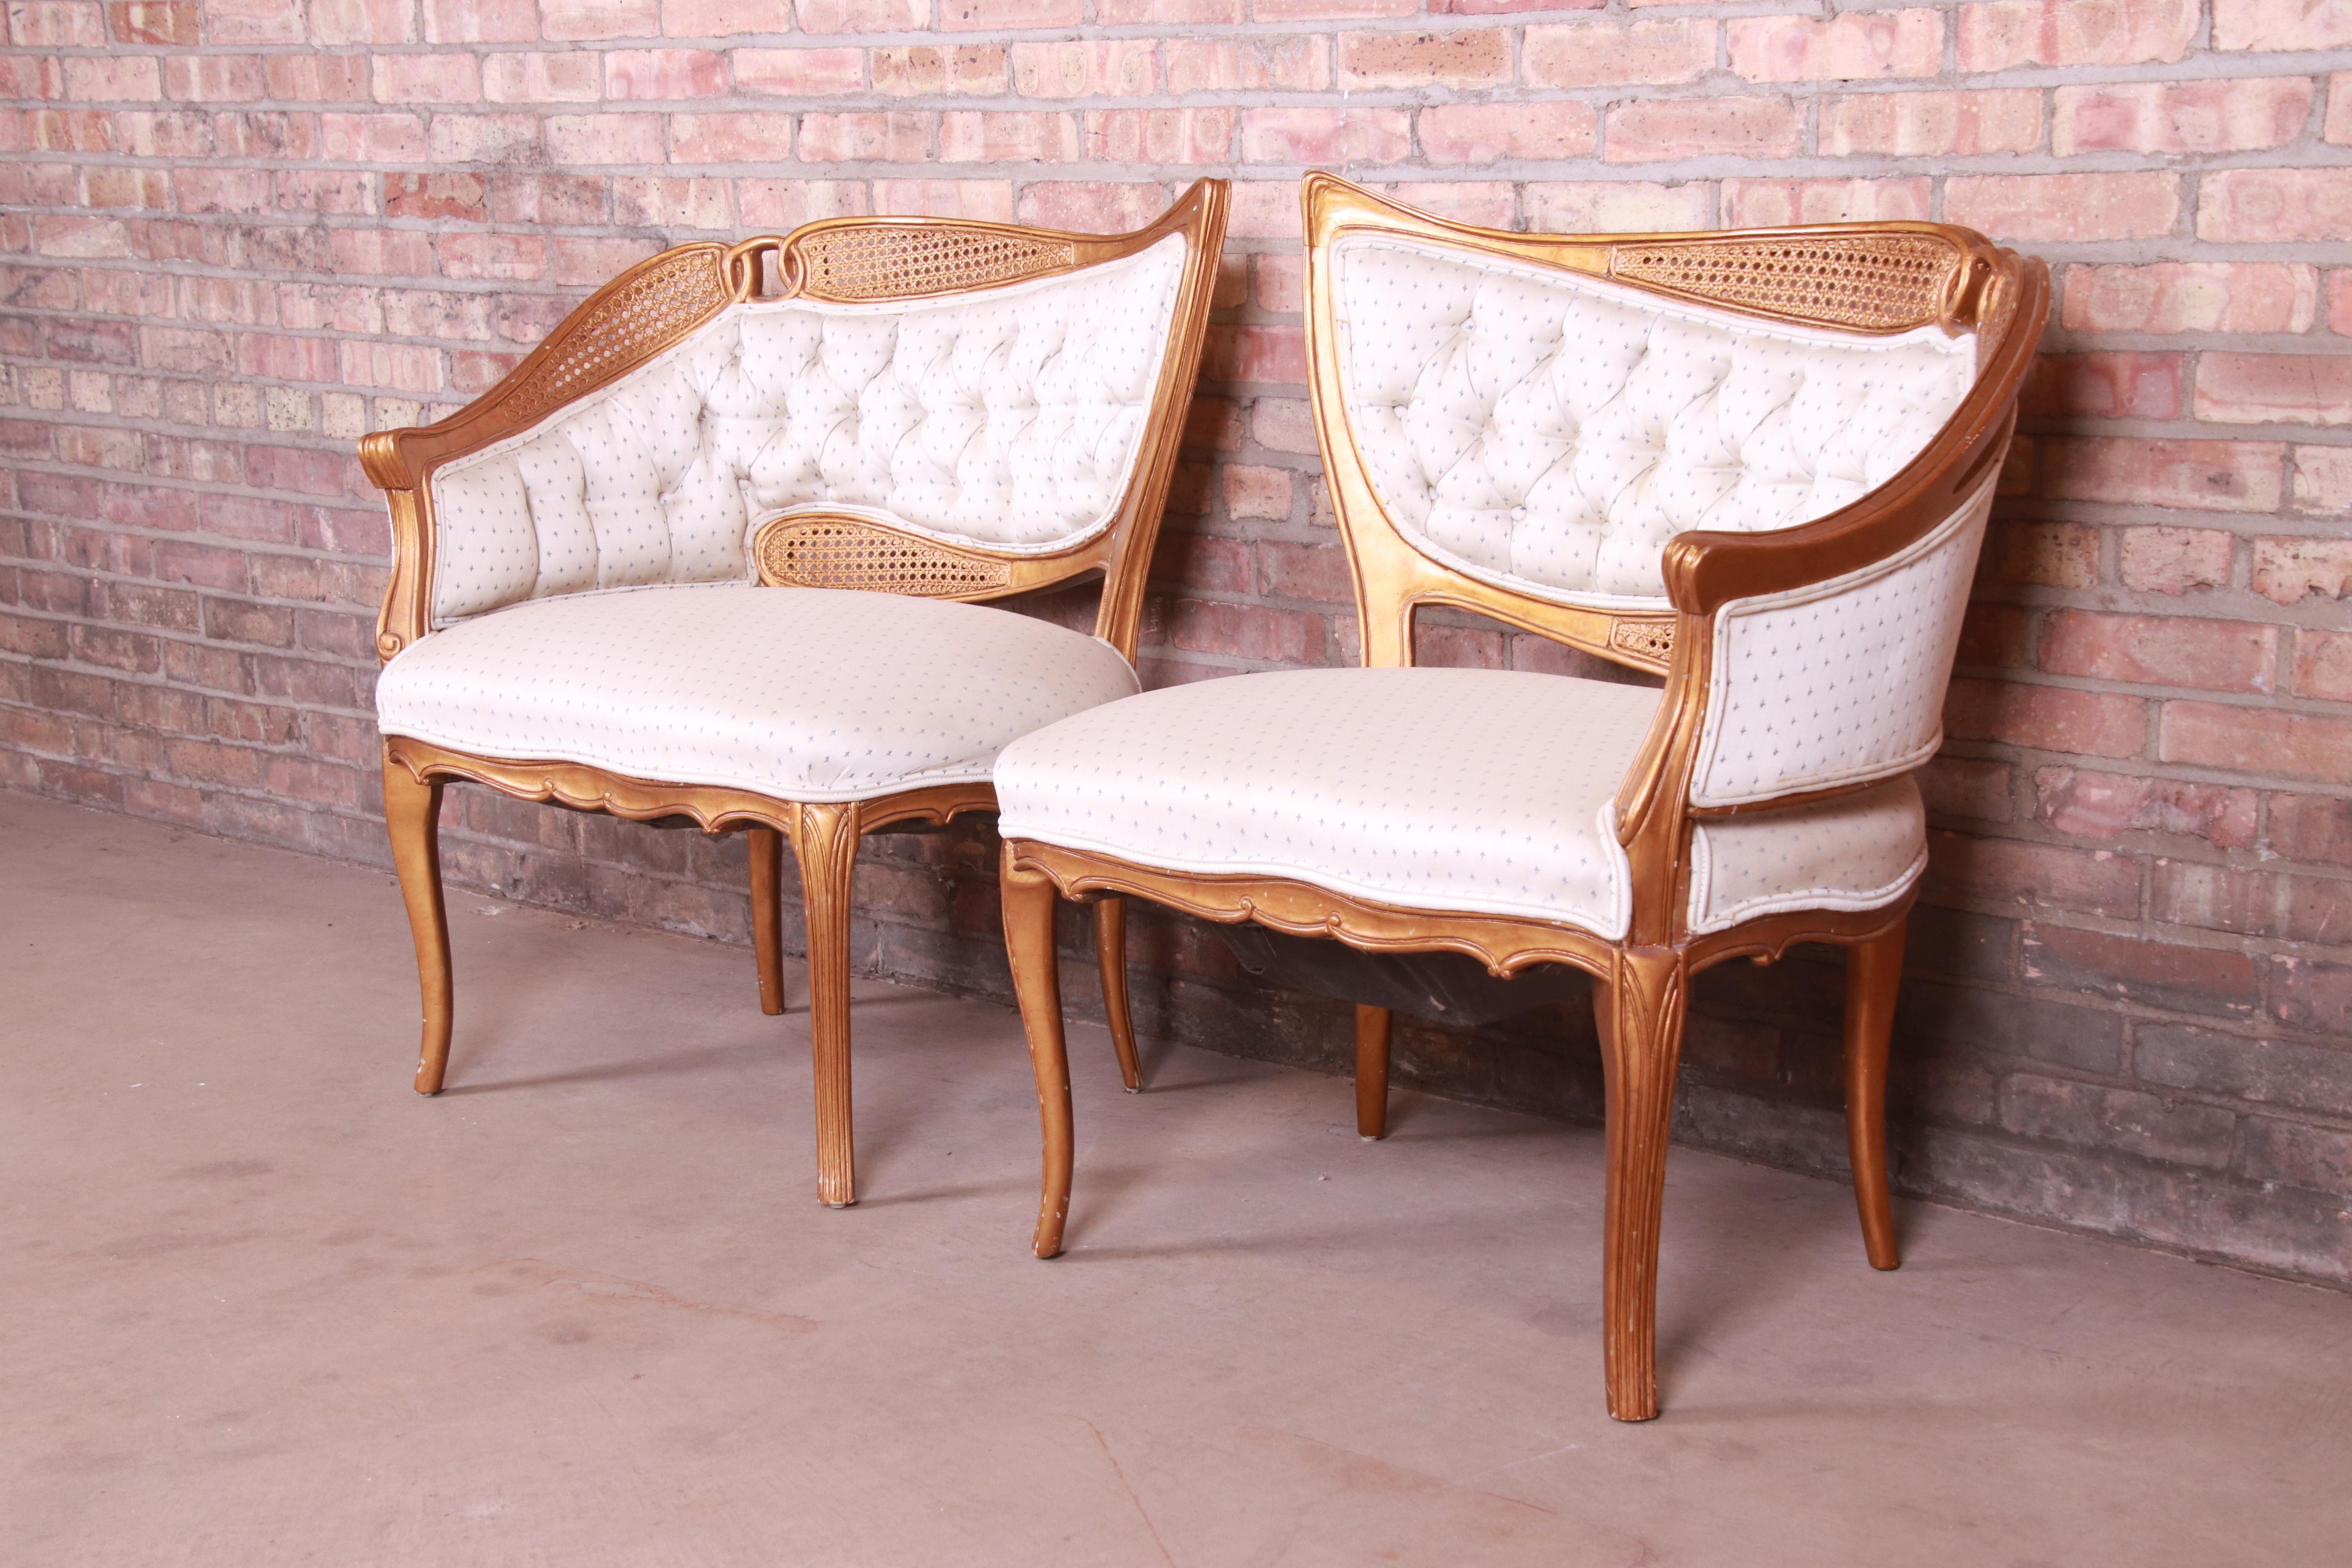 20th Century French Rococo Louis XV Giltwood and Cane Upholstered Fireside Chairs, Pair